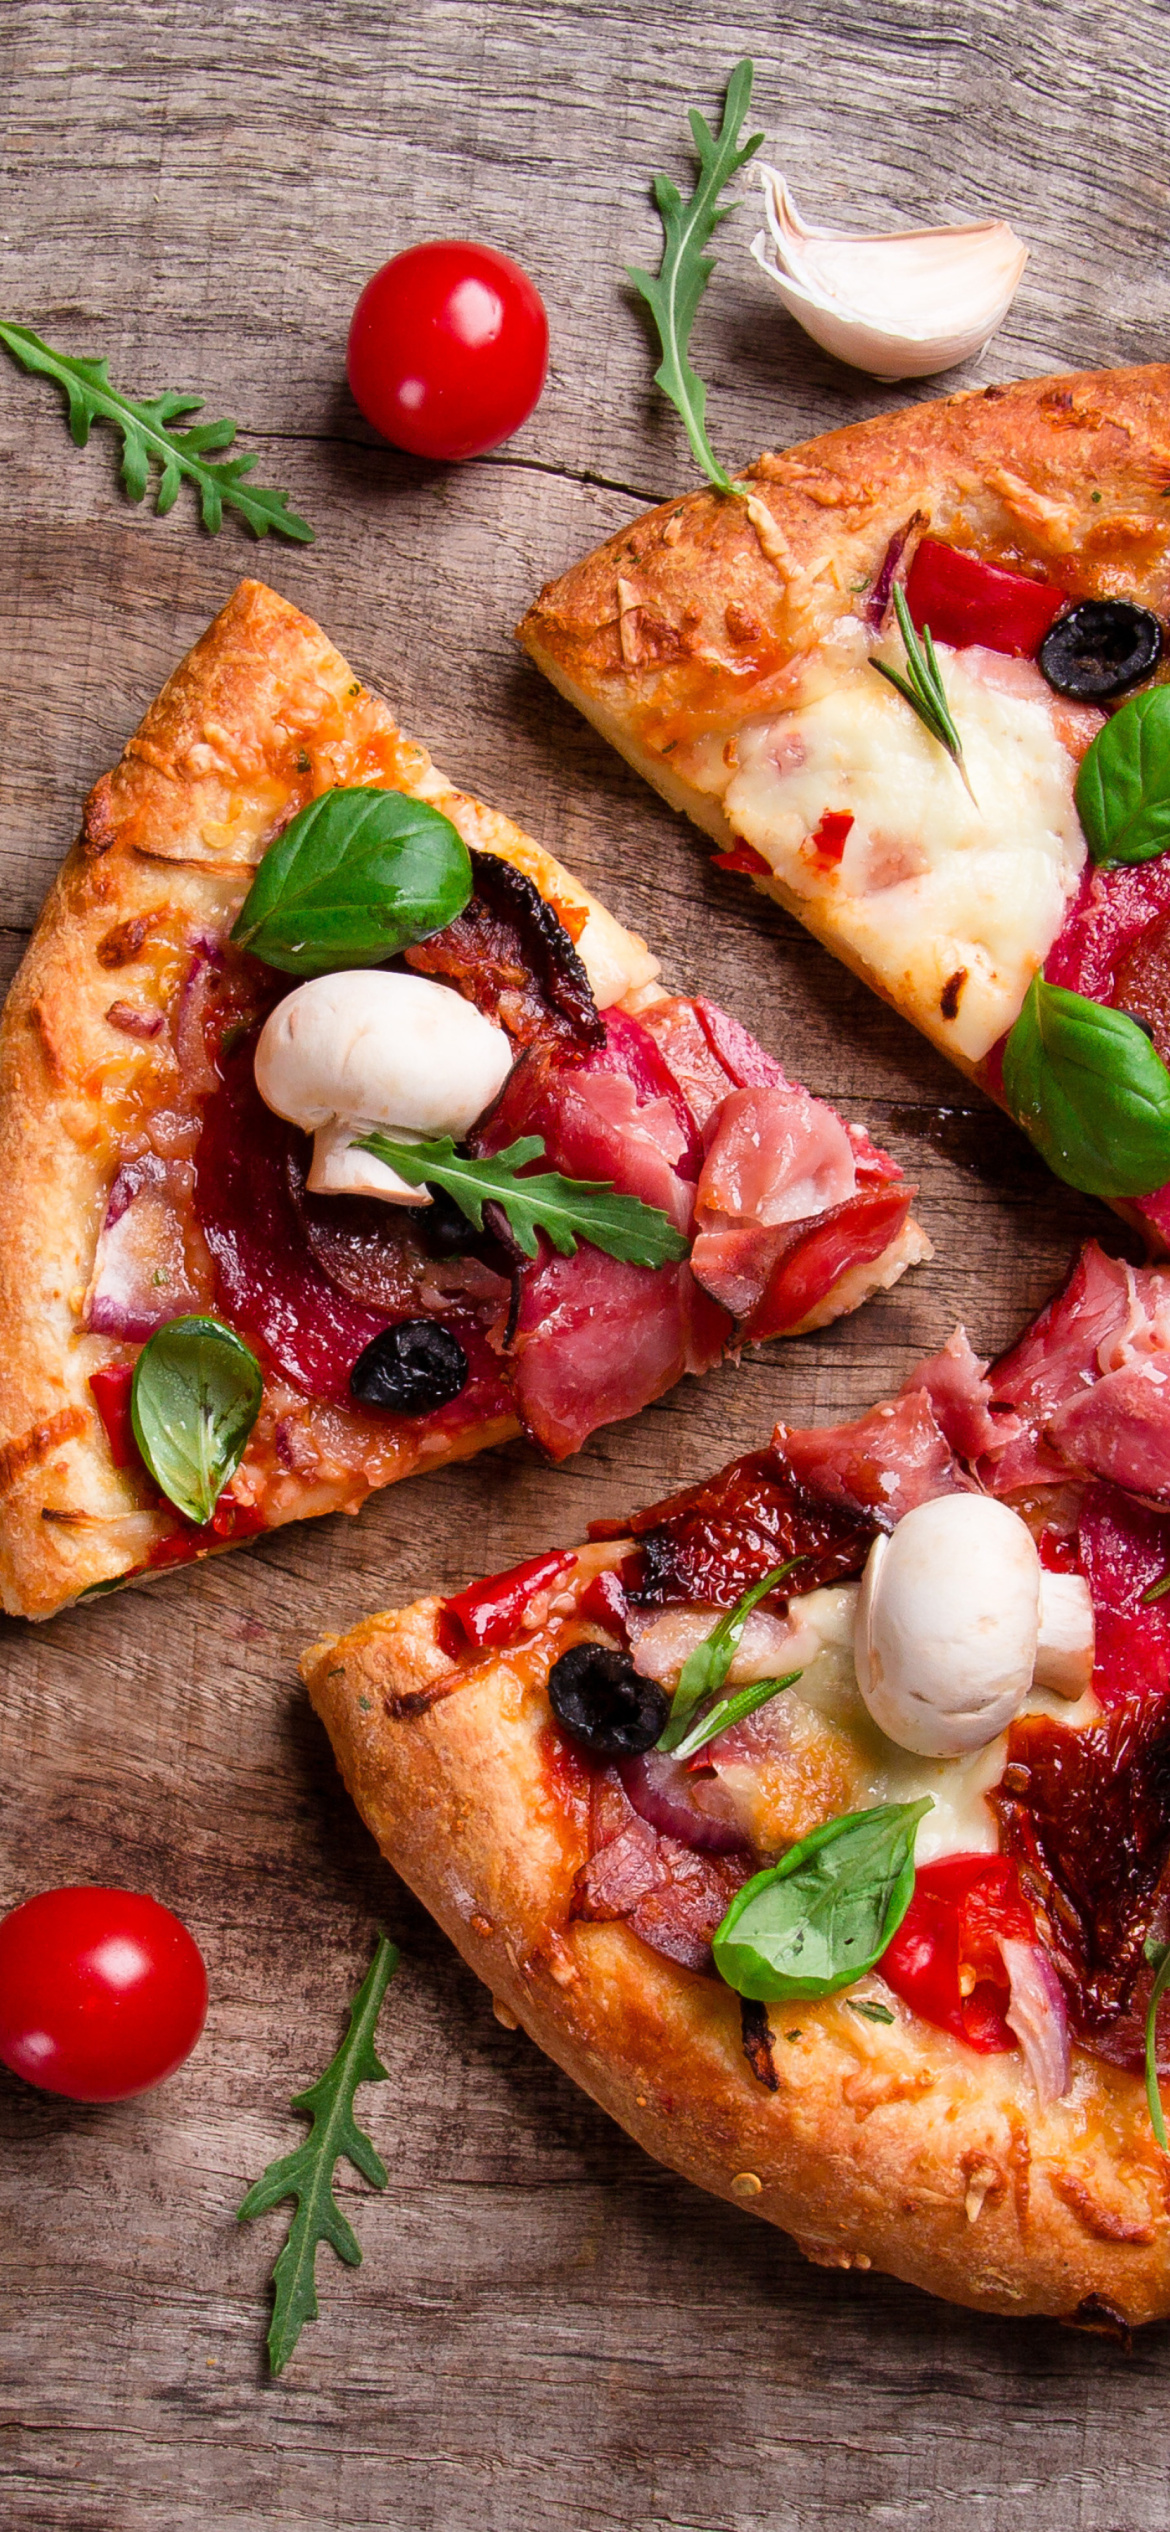 Pizza with mushrooms and olives wallpaper 1170x2532